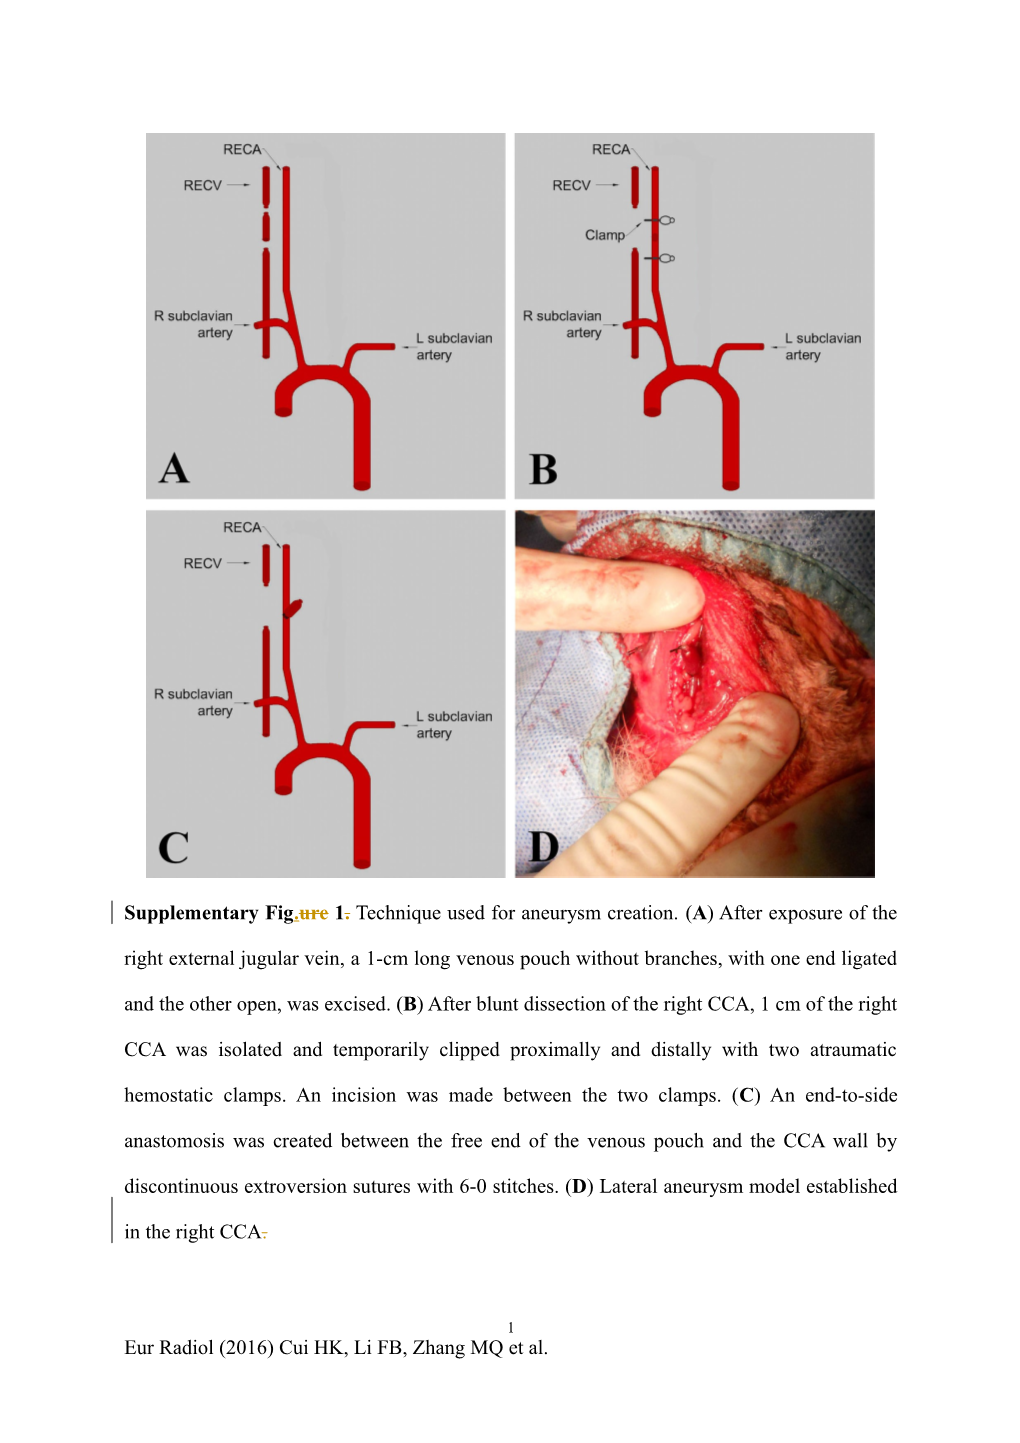 Magnesium Alloy Covered Stent for a Lateral Aneurysm Model in Rabbit Common Carotid Artery